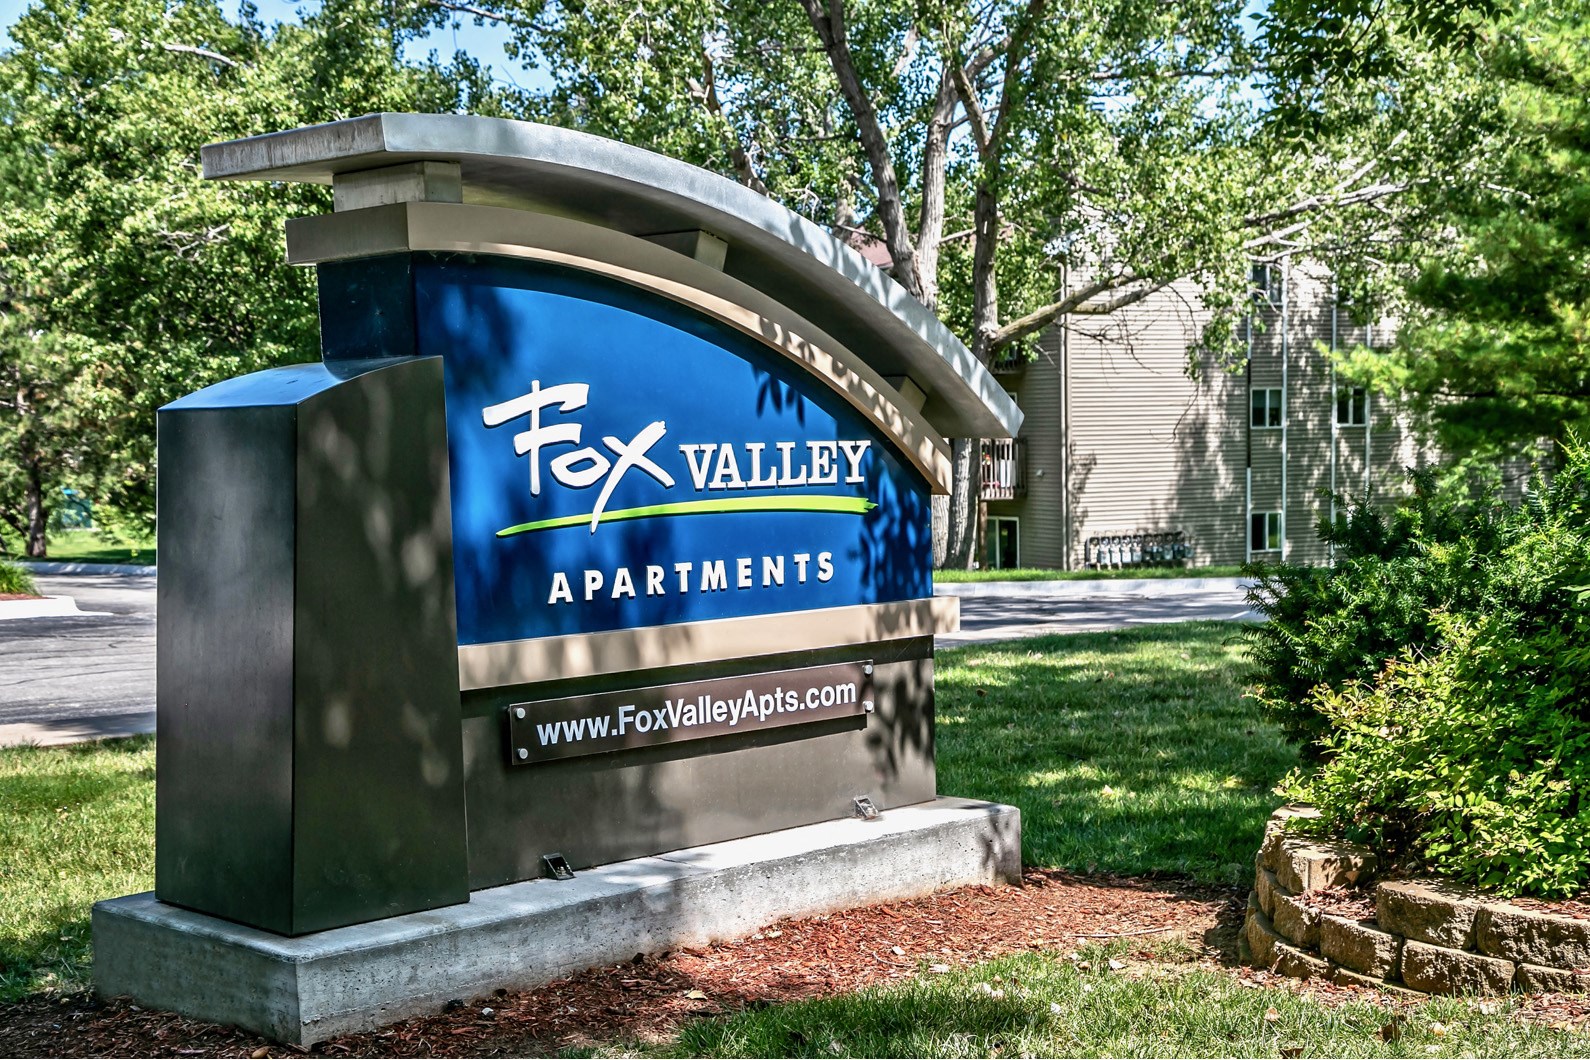 Property signage at Fox Valley Apartments in Omaha, NE